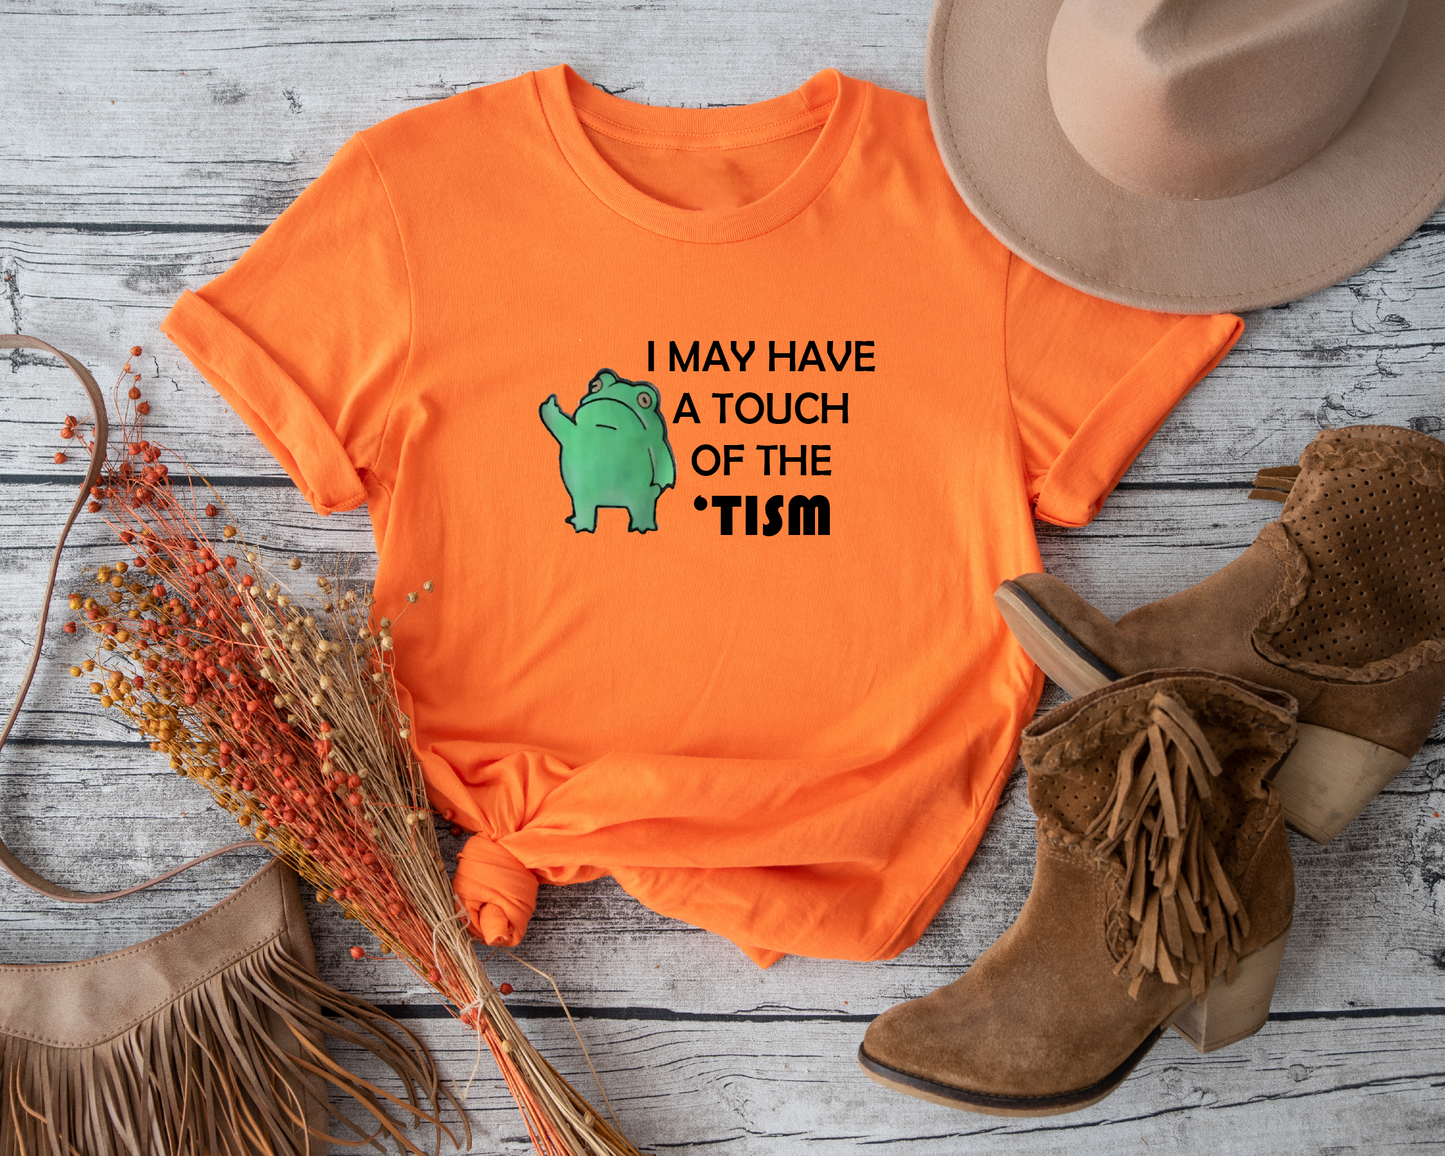 Embrace your unique personality with this delightful "I May Have a Touch of the" tee. 